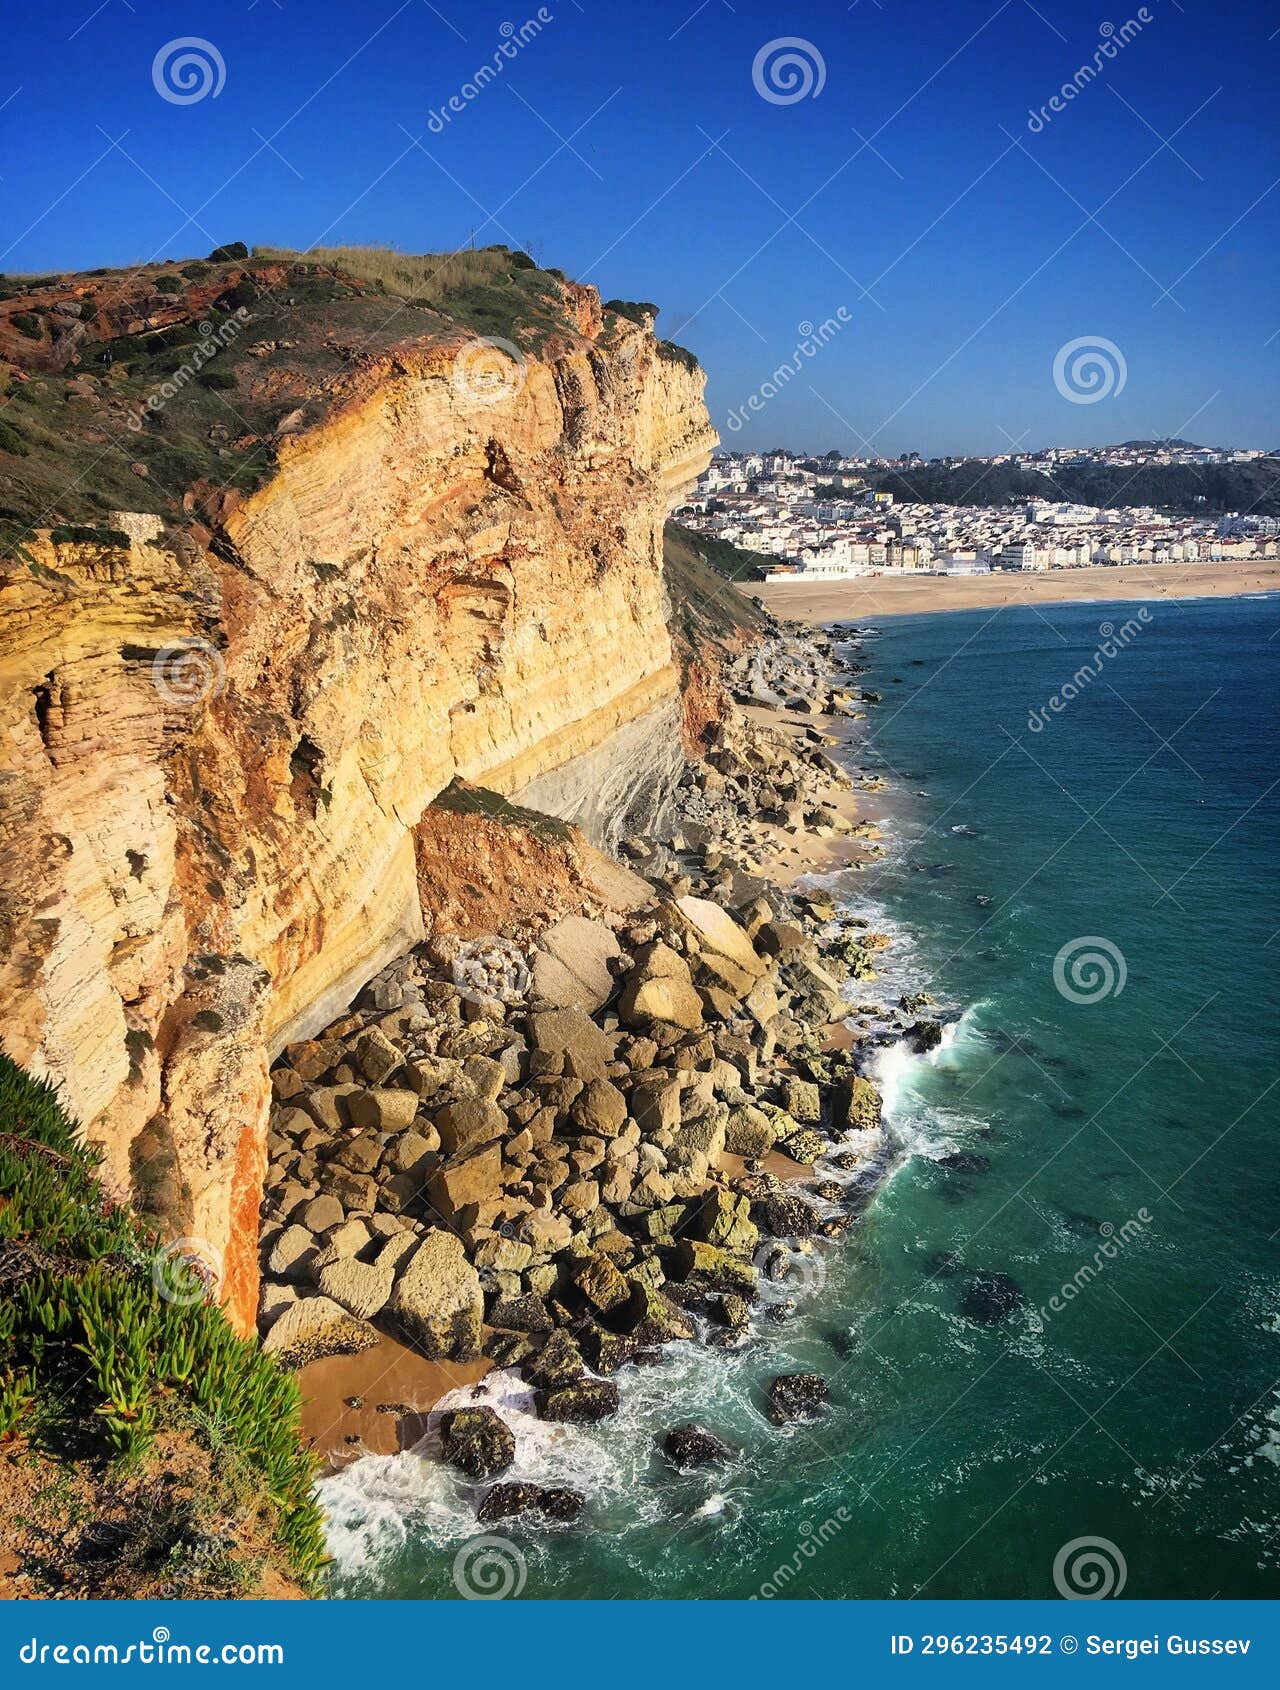 view of the cliff and the coast in nazarÃ©, portugal, december 2018